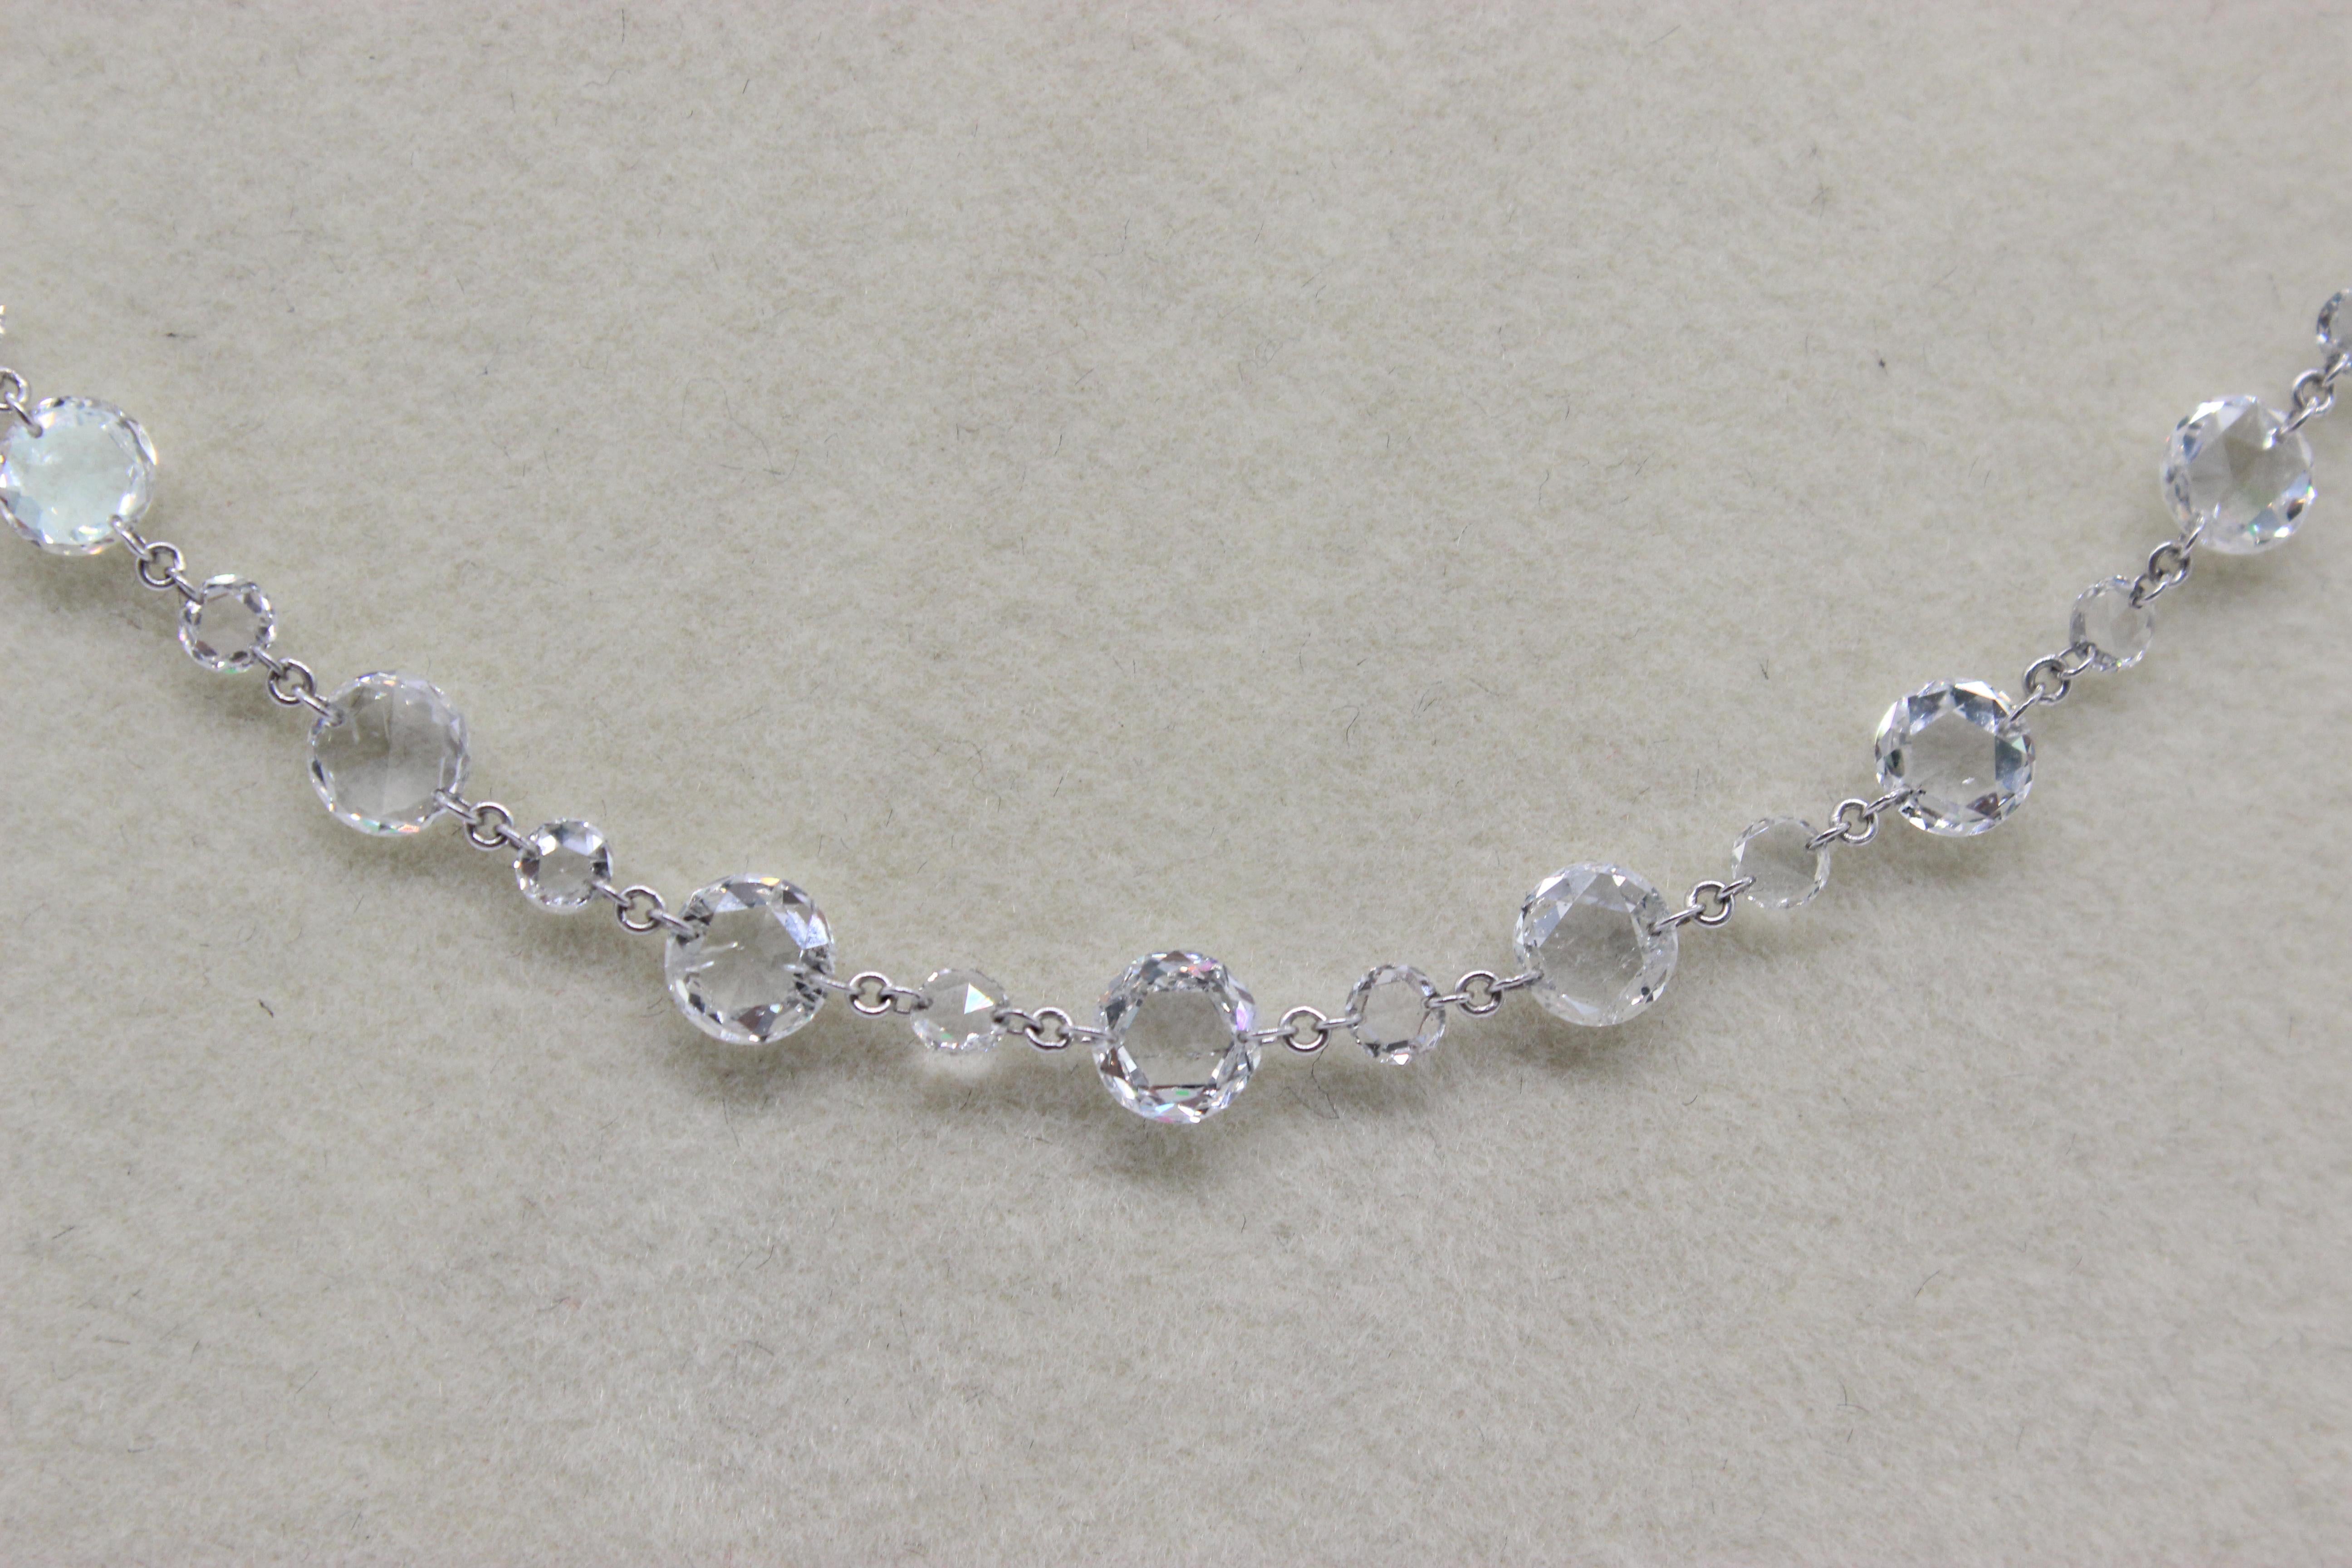 PANIM  Classic Diamond Rosecut 18k White Gold Choker Link Necklace

Stunning & Classic Panim diamond rosecut necklace made of 18kt white gold, with links made of nearly invisible 18kt white gold. The diamond rosecuts weigh about 9 carats. This